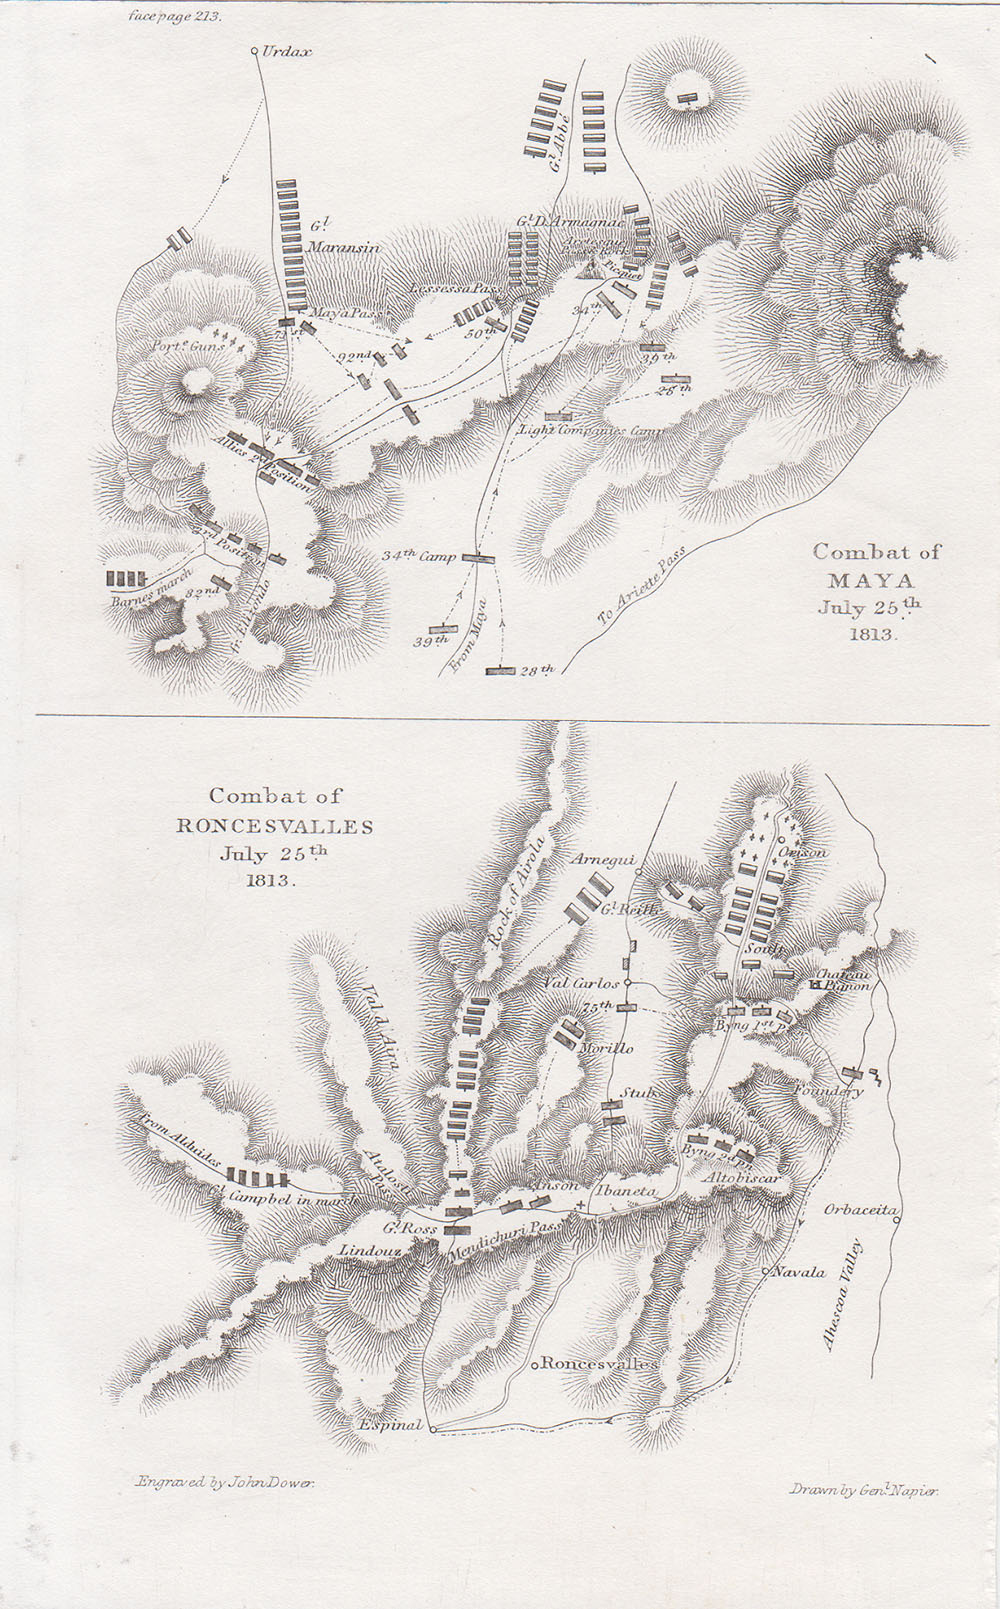 Combat of Maya July 25th 1813  Combat of Roncesvalles July 25th 1813